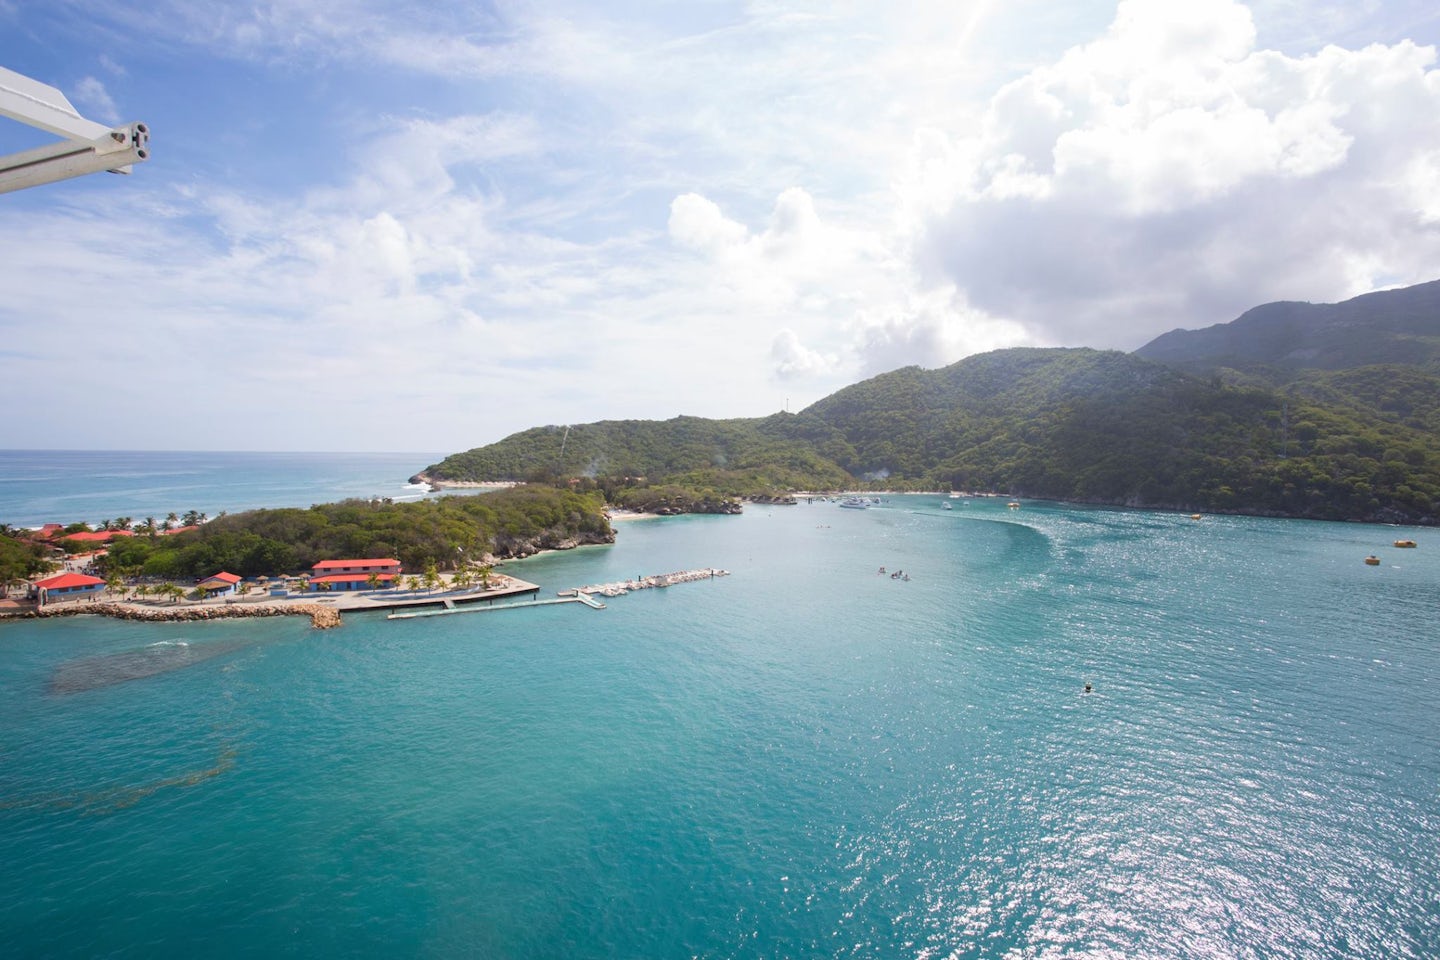 The view of Labadee from our room